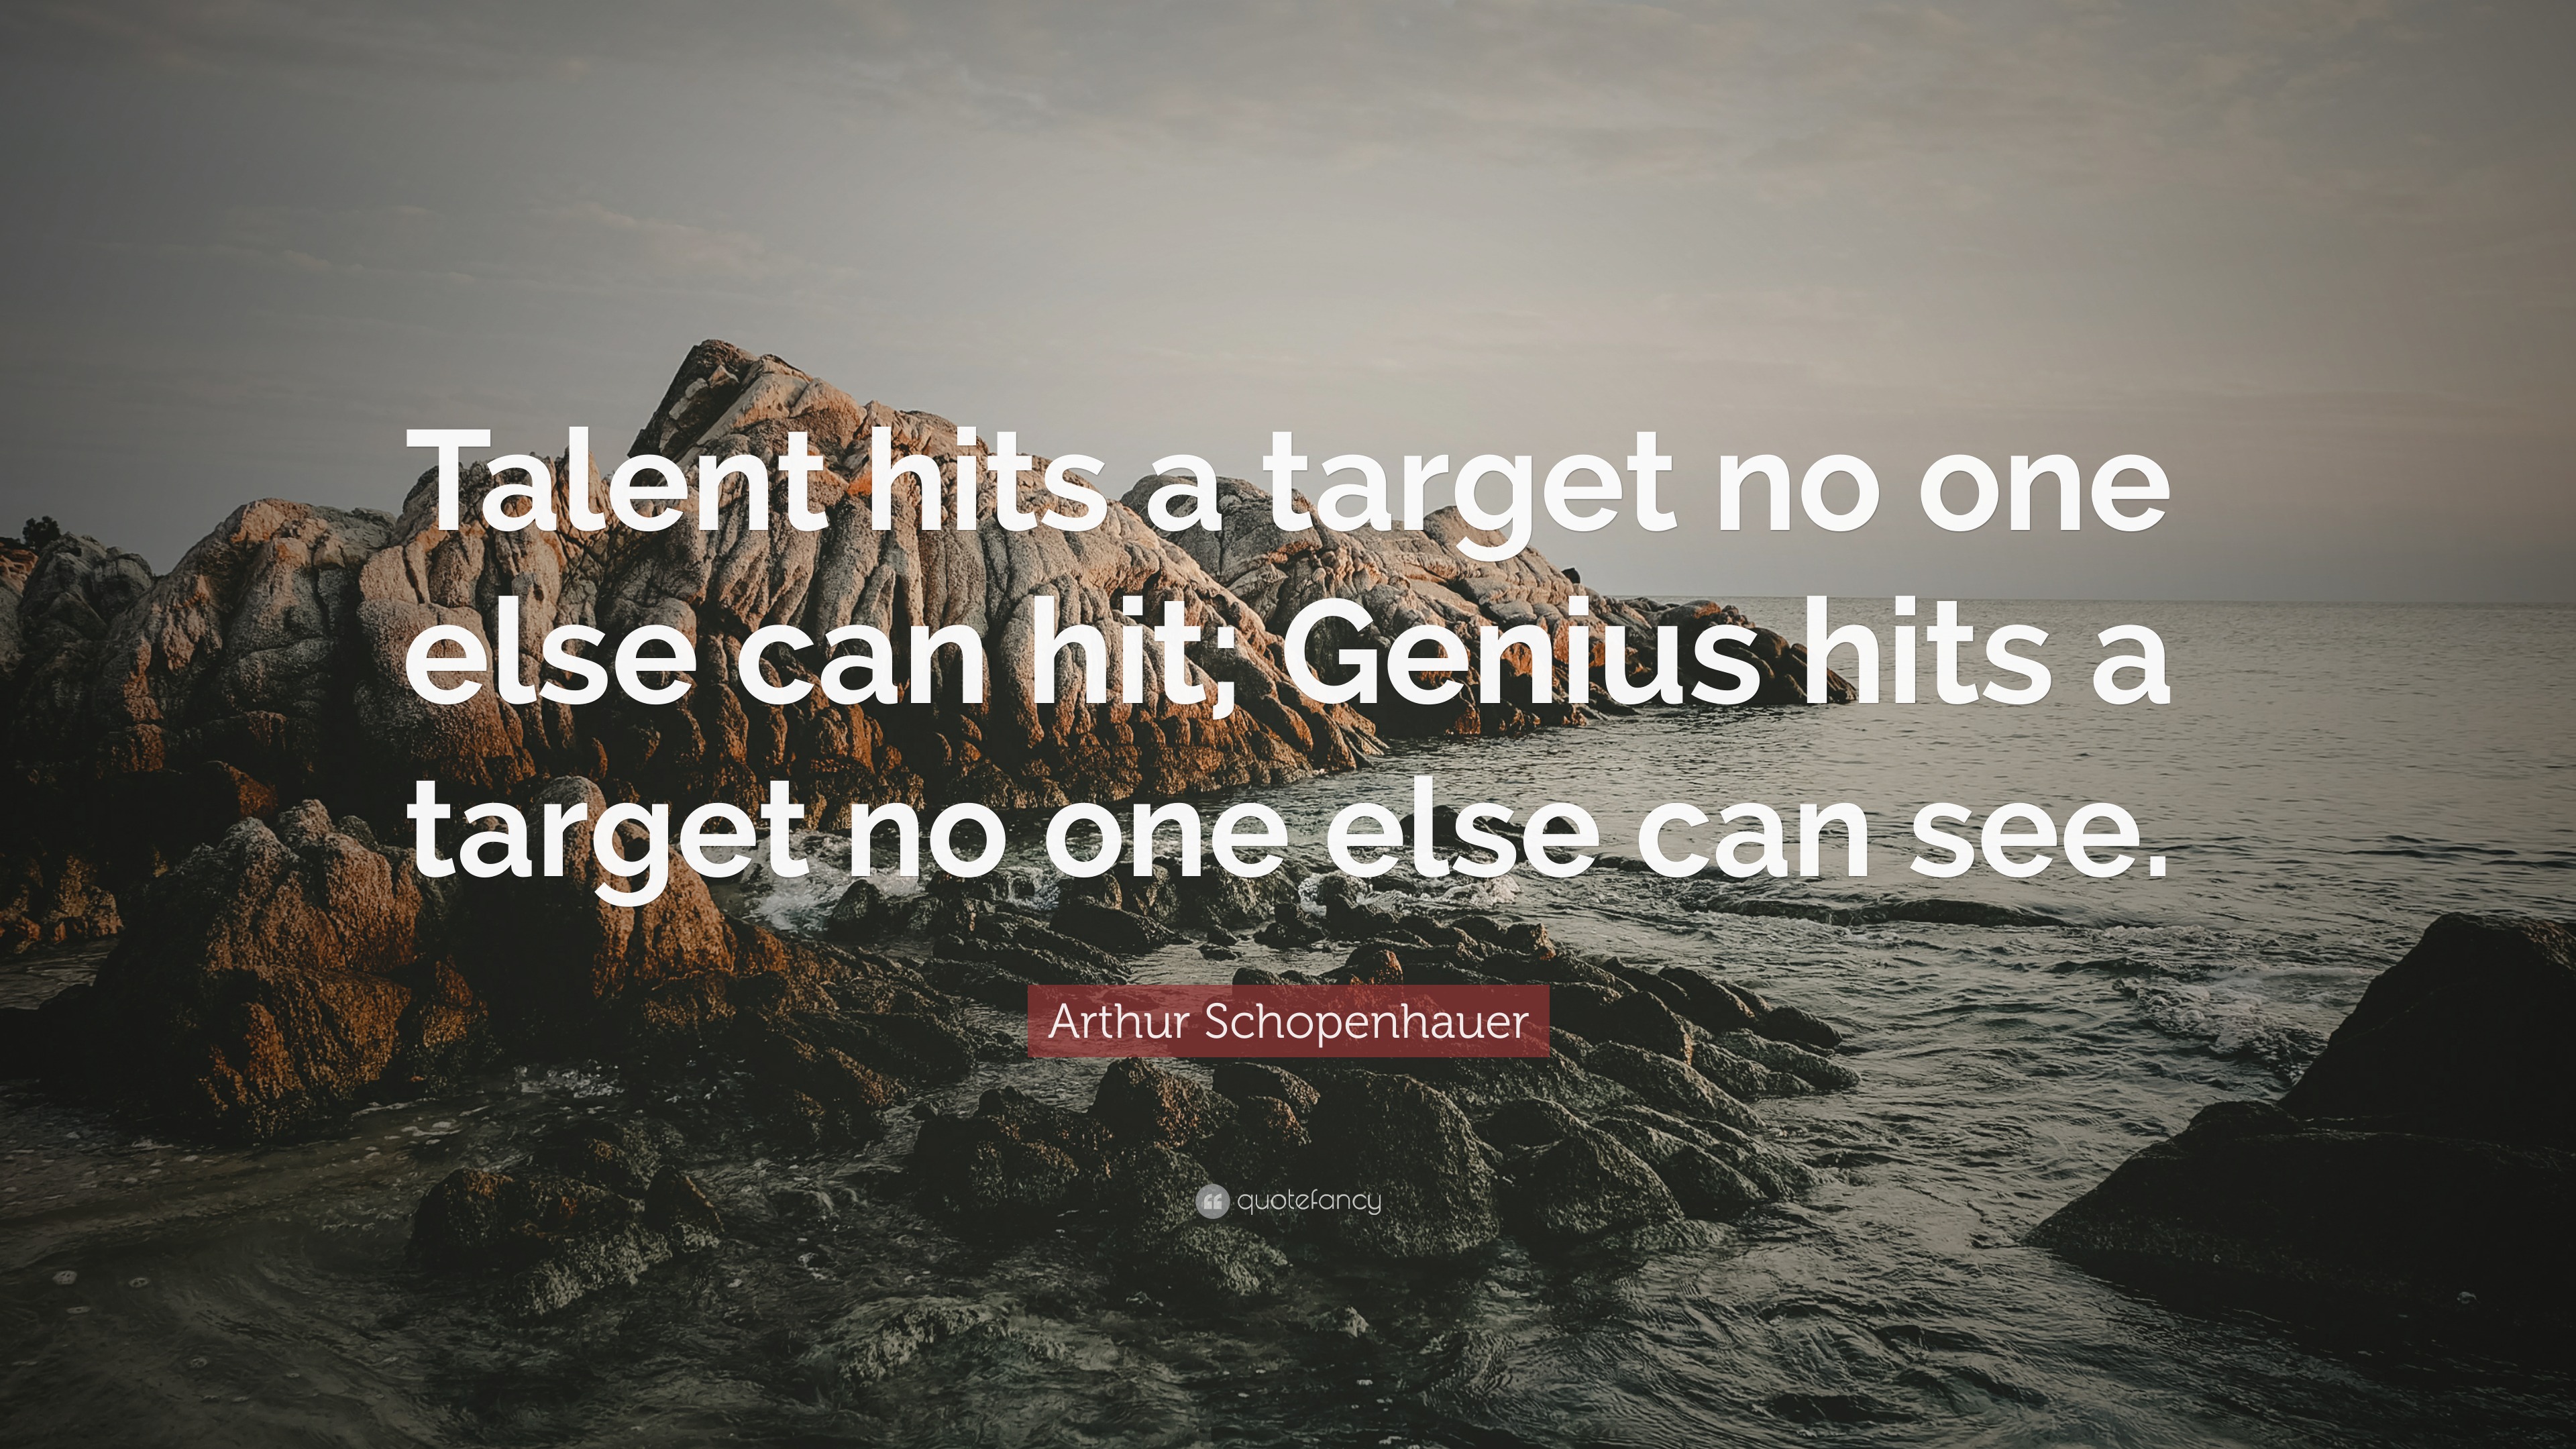 Arthur Schopenhauer Quote: “Talent hits a target no one else can hit